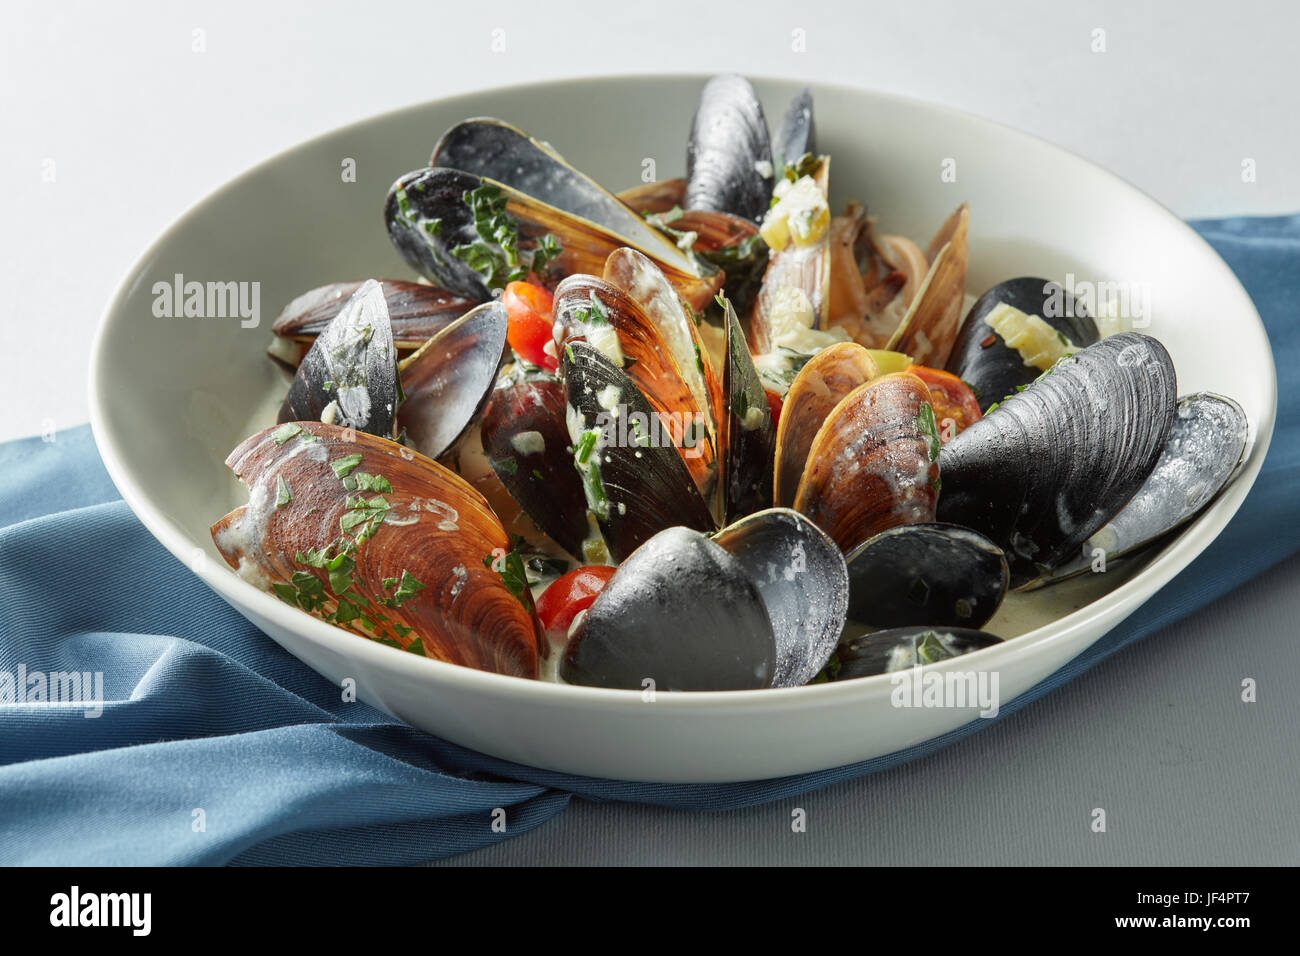 dish of mussels pics with tomato sauce Stock Photo